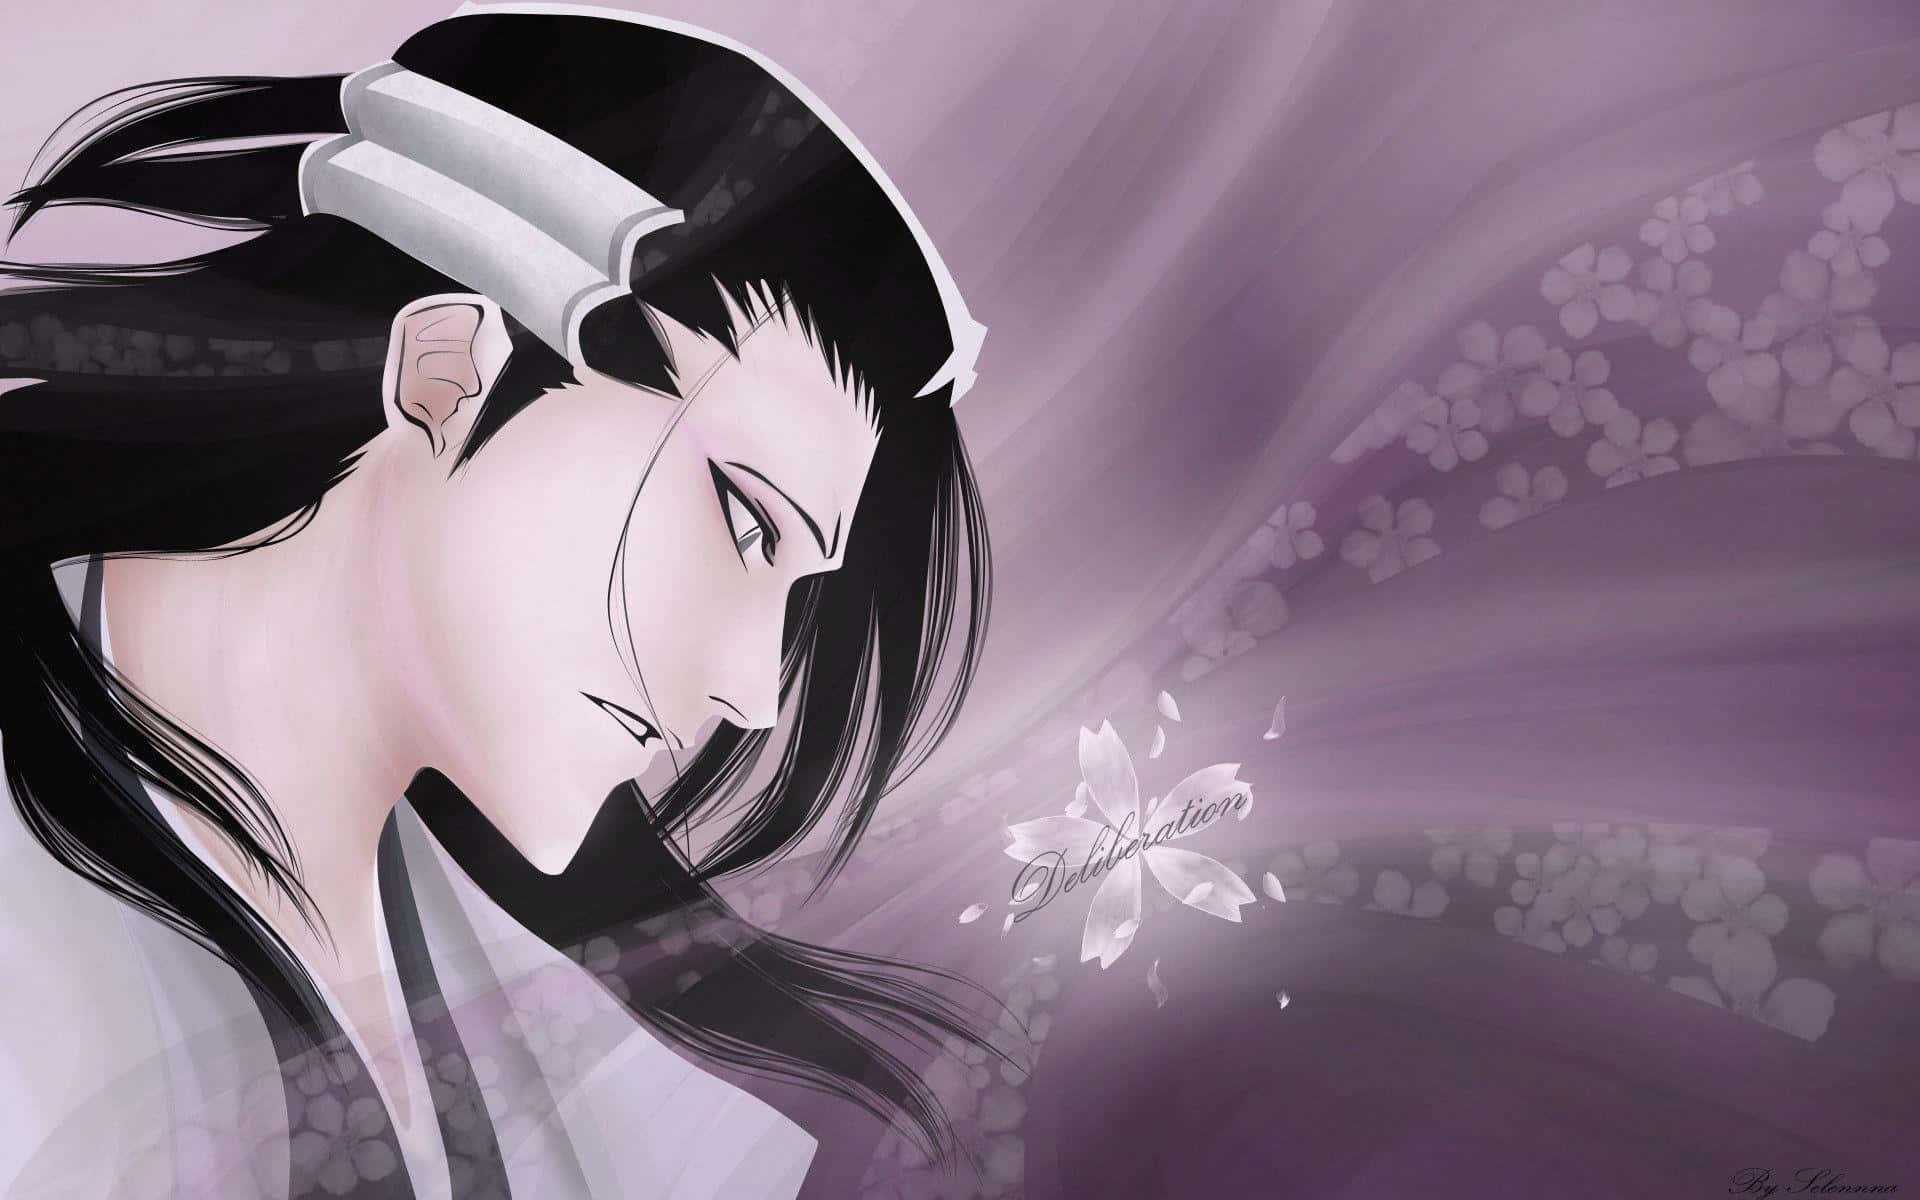 Byakuya Kuchiki, the captain of the 6th Division in the Gotei 13 Wallpaper